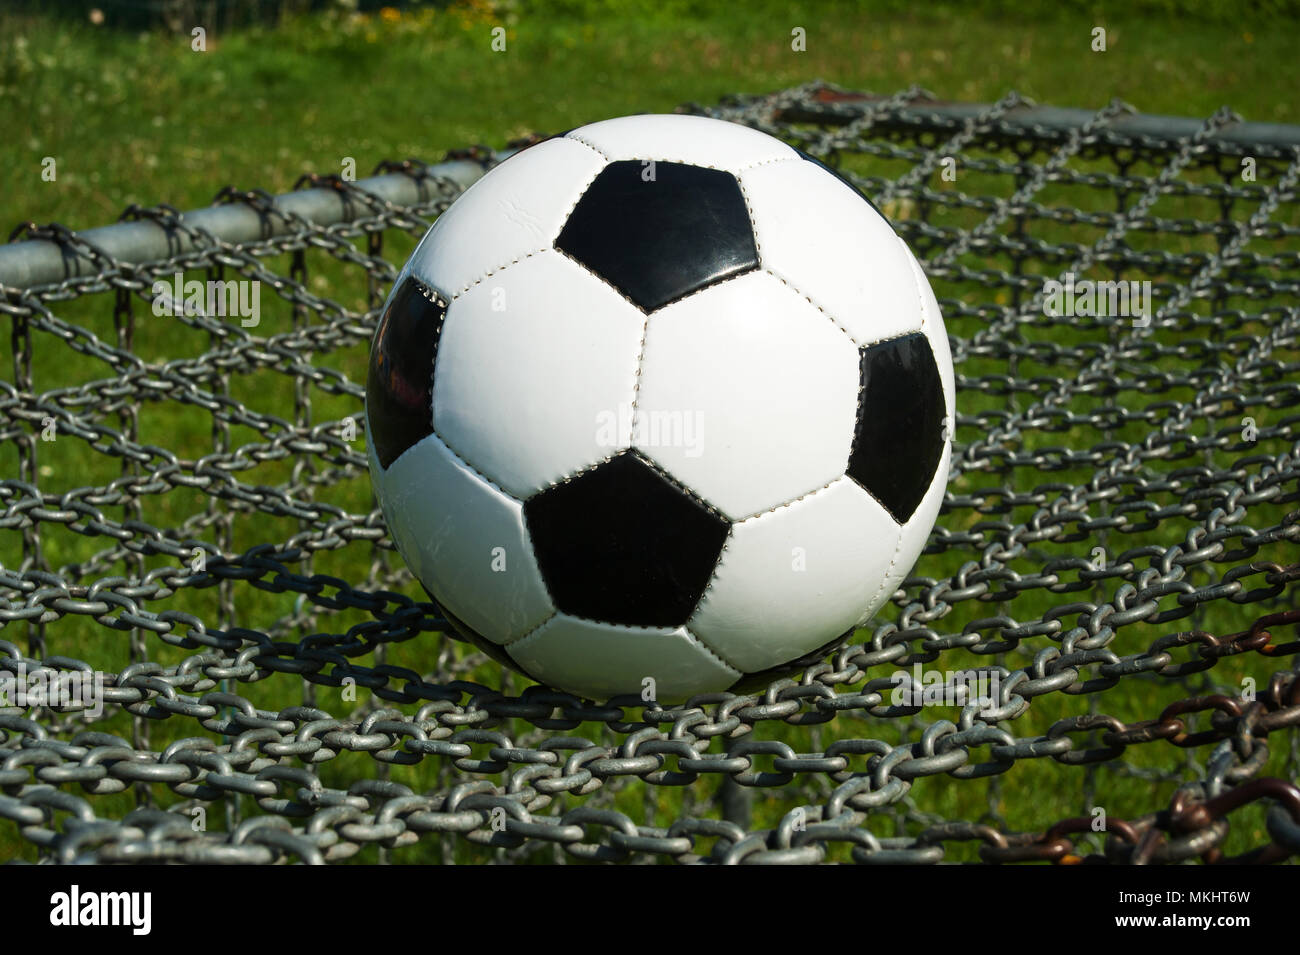 soccer ball classic black and white on the top of a chain goal in the summer outdoor Stock Photo